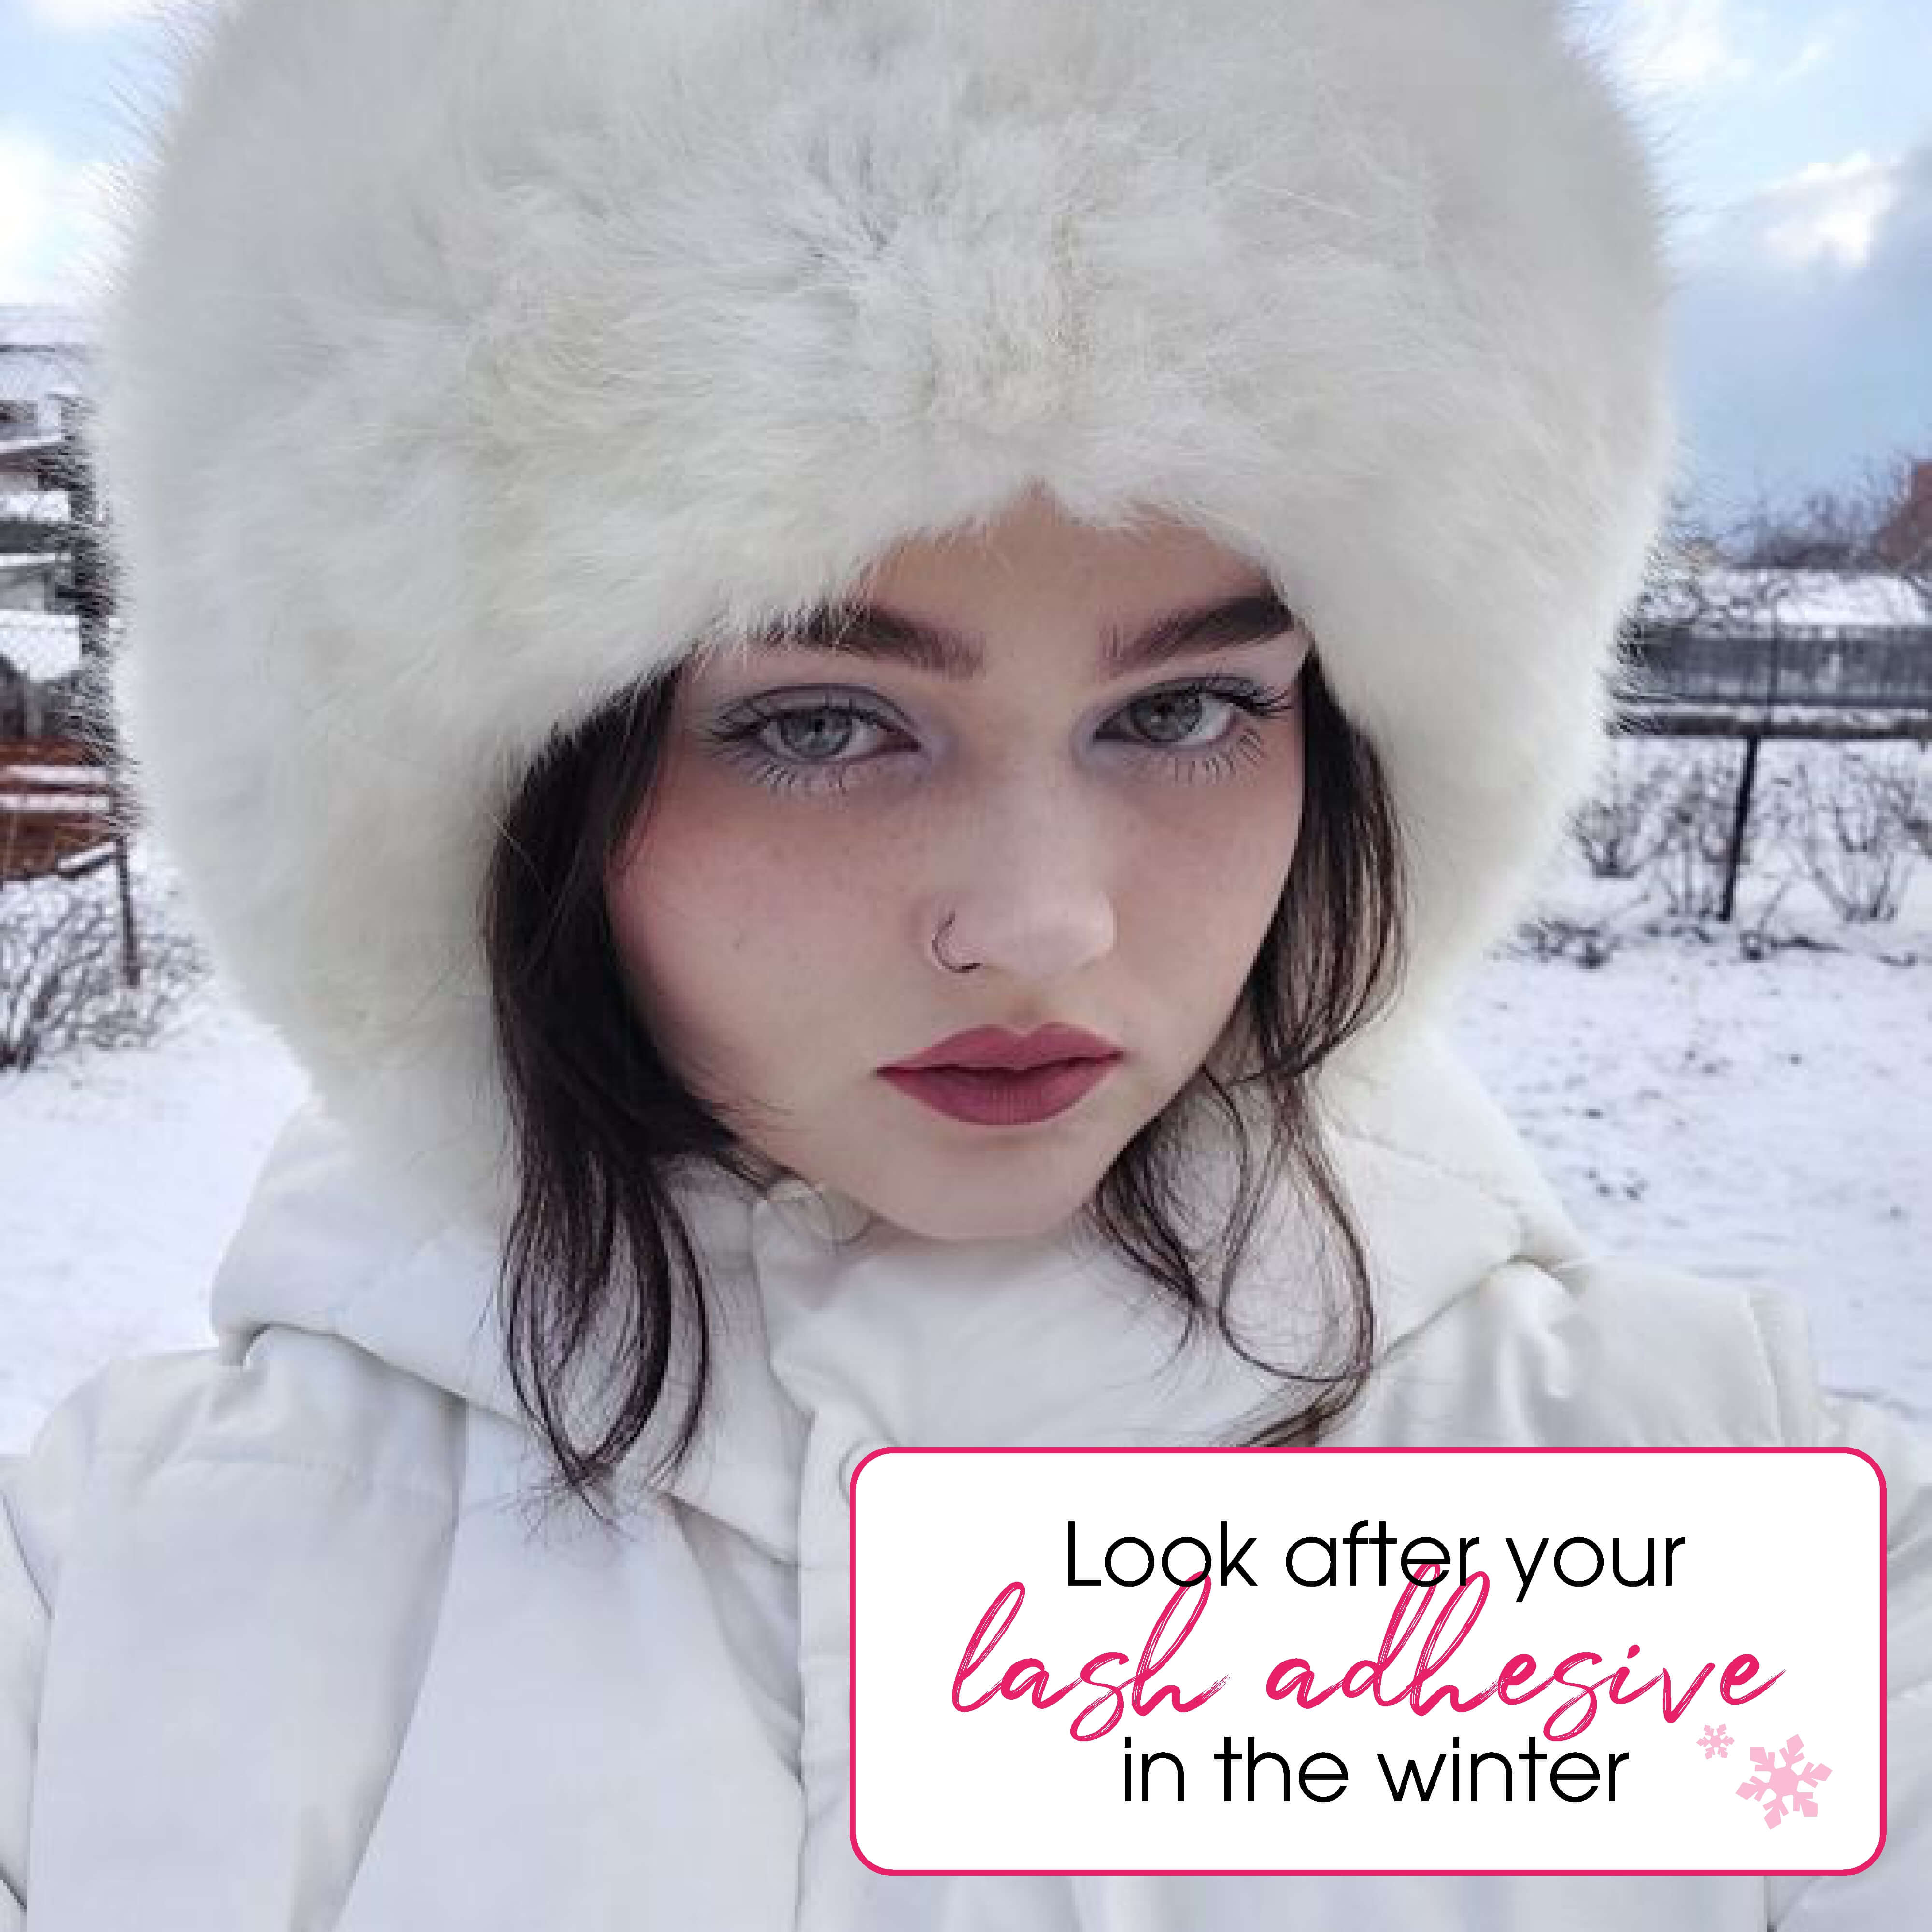 How to look after your lash adhesive in the winter